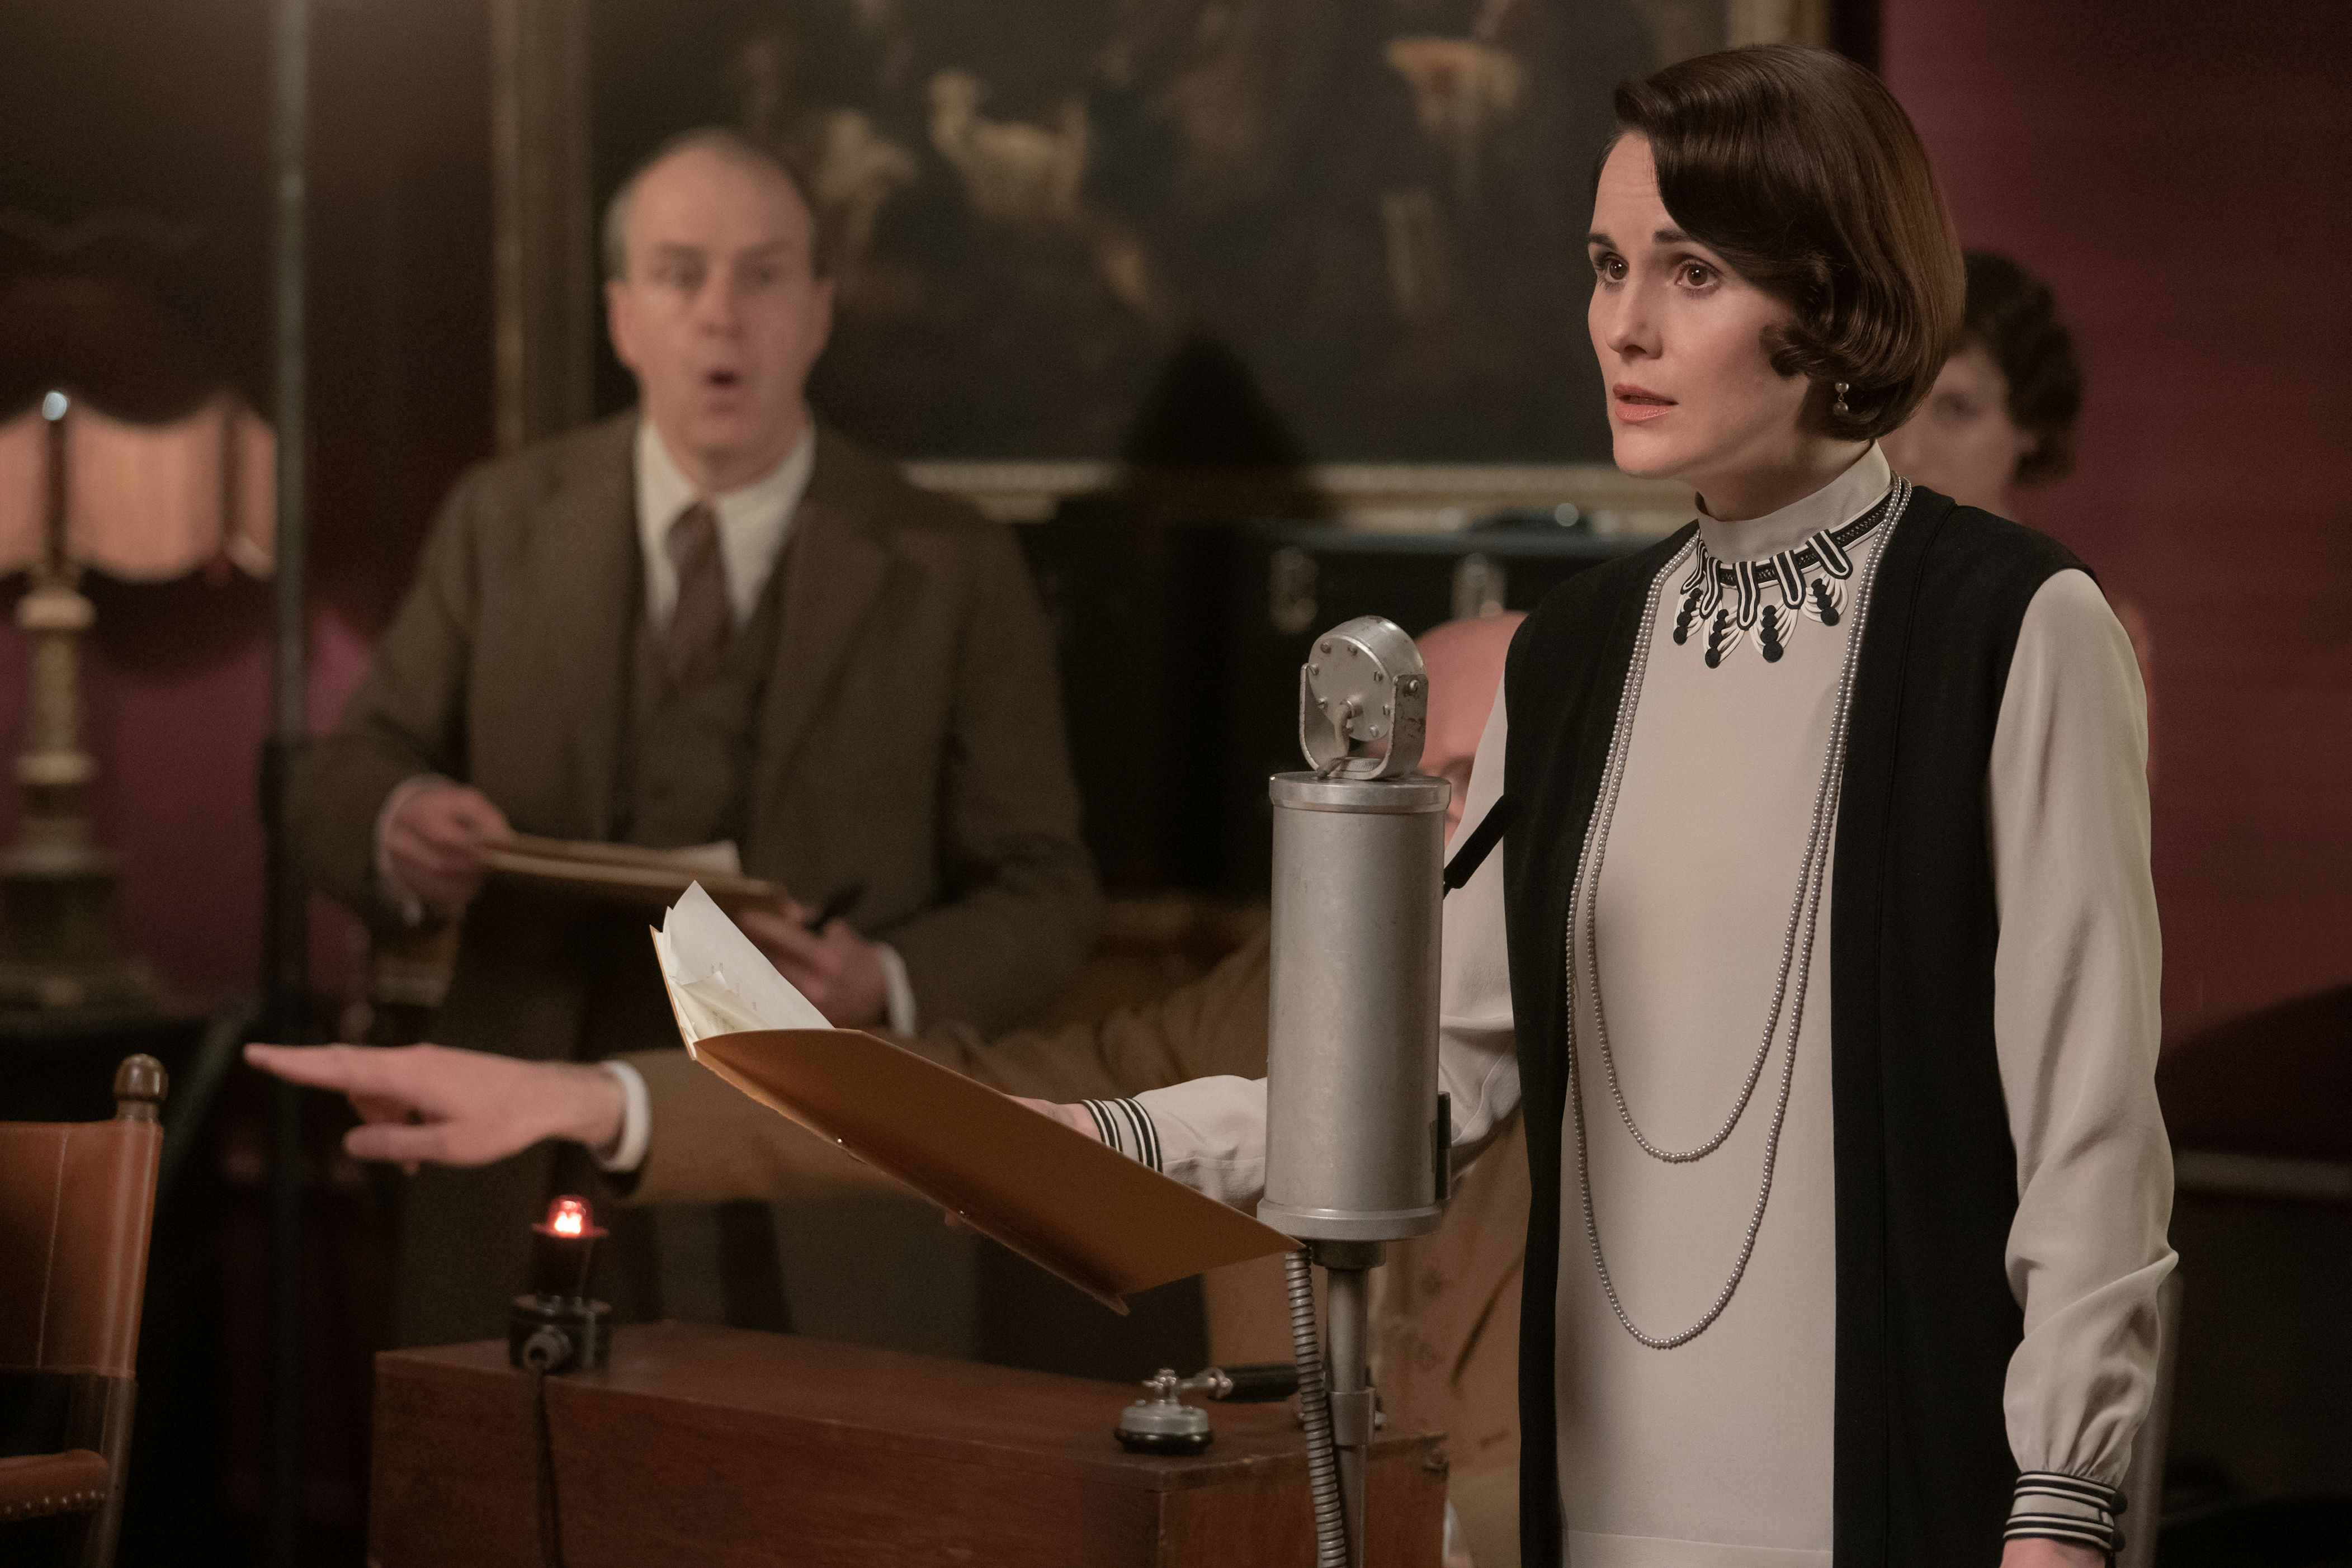 <p><a href="https://www.wonderwall.com/celebrity/profiles/overview/michelle-dockery-1488.article">Michelle Dockery</a>'s Lady Mary was impeccably dressed, as usual, in a stone-colored dress with an embellished neckline in the 2022 film "Downton Abbey: A New Era." </p>